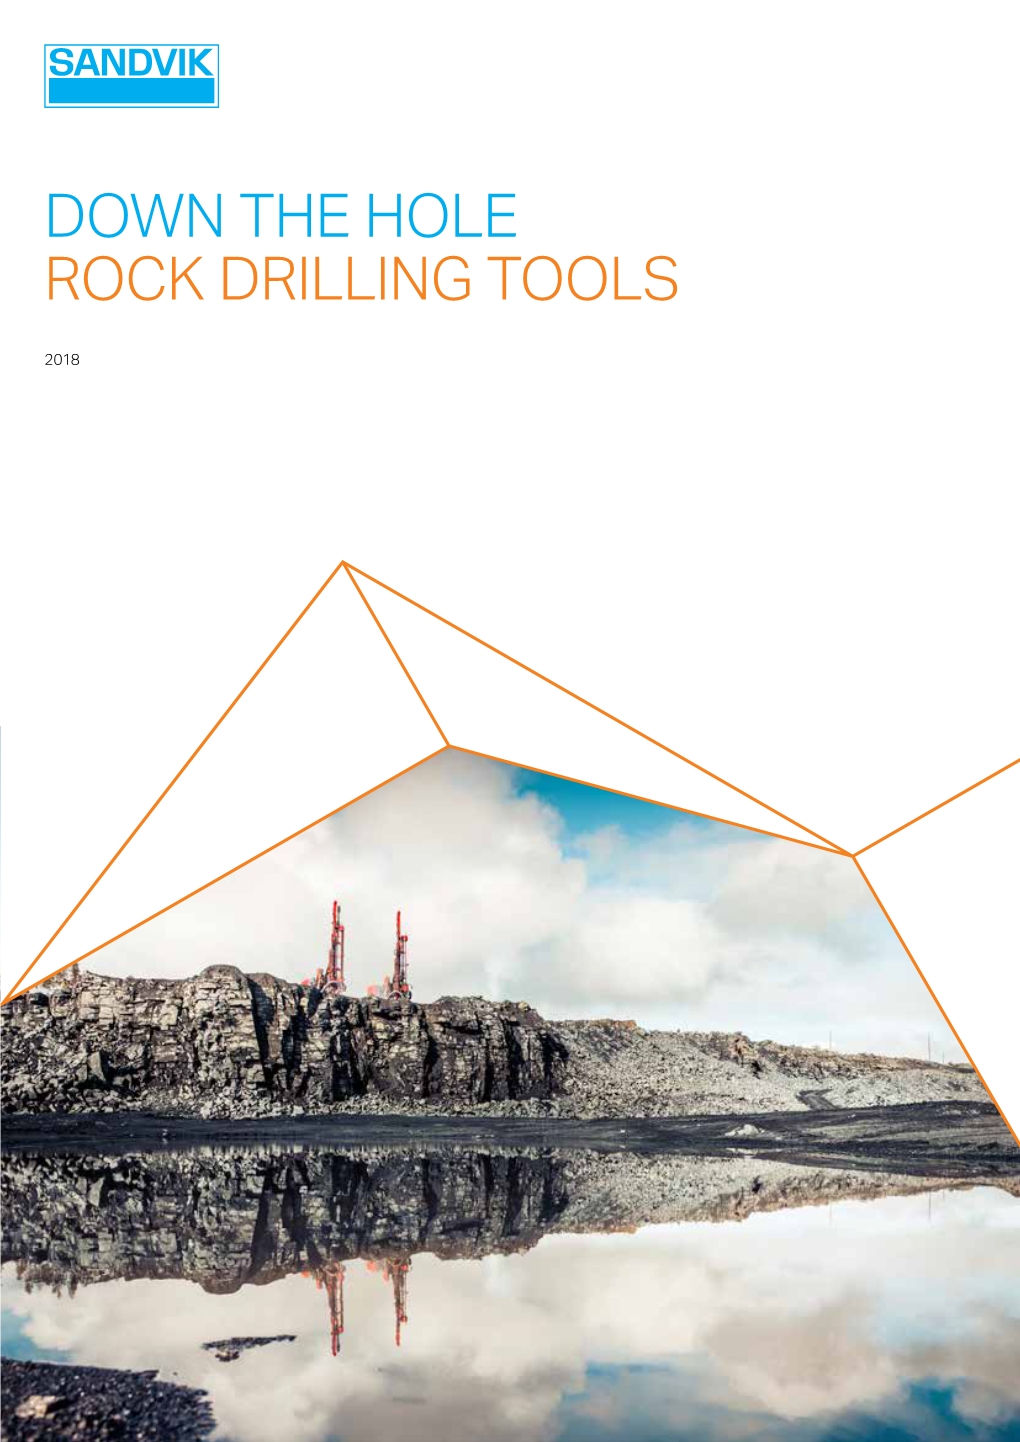 Down the Hole Rock Drilling Tools